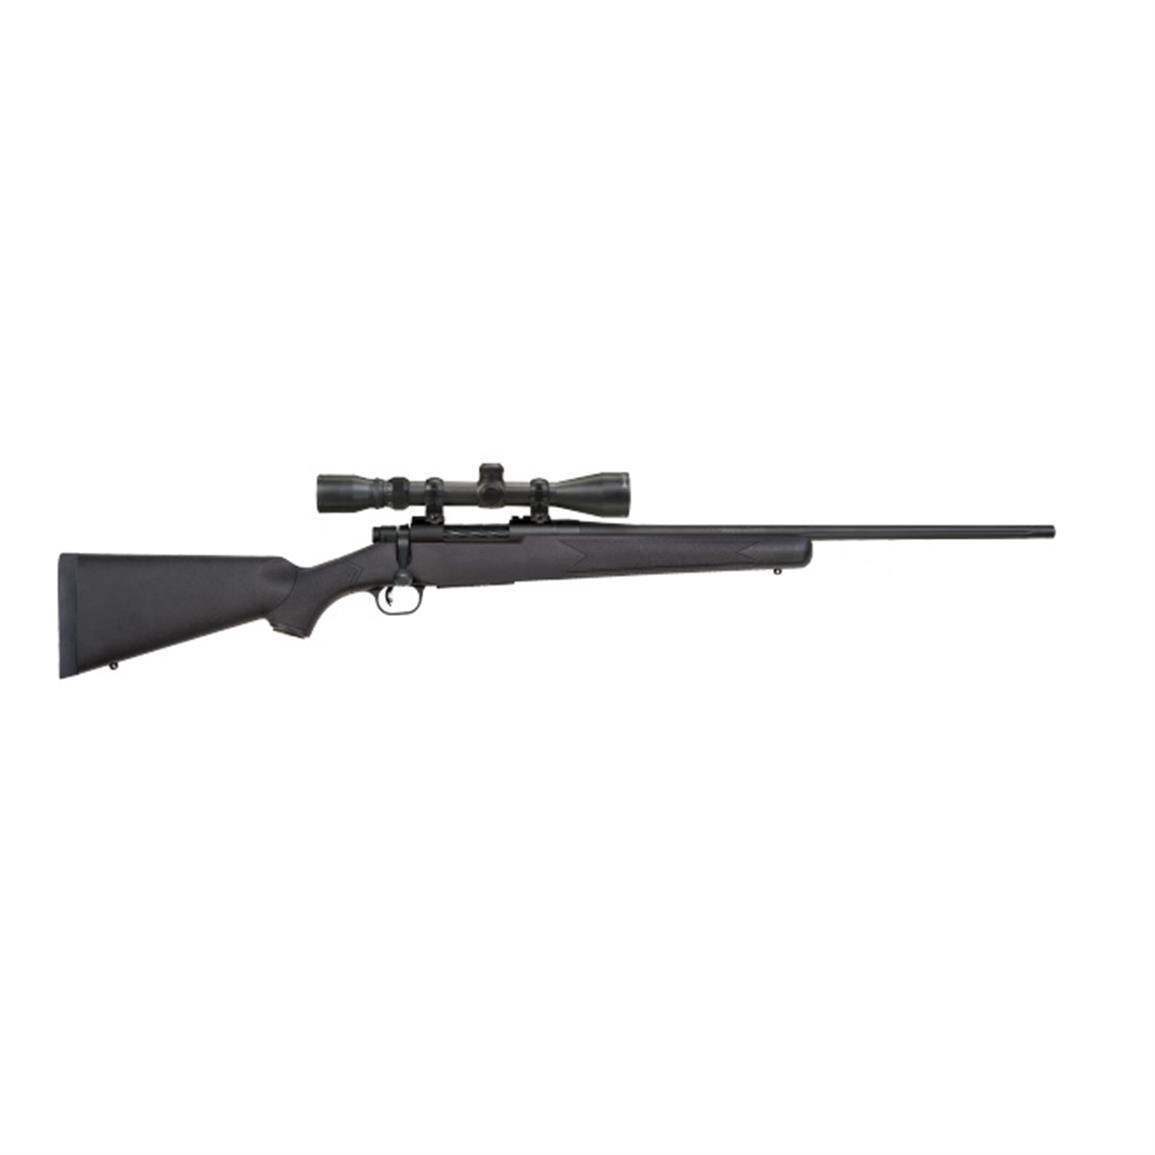 Mossberg Patriot Combo, Bolt Action, .308 Winchester, 22" Barrel, 3-9x40mm Scope, 5+1 Rounds